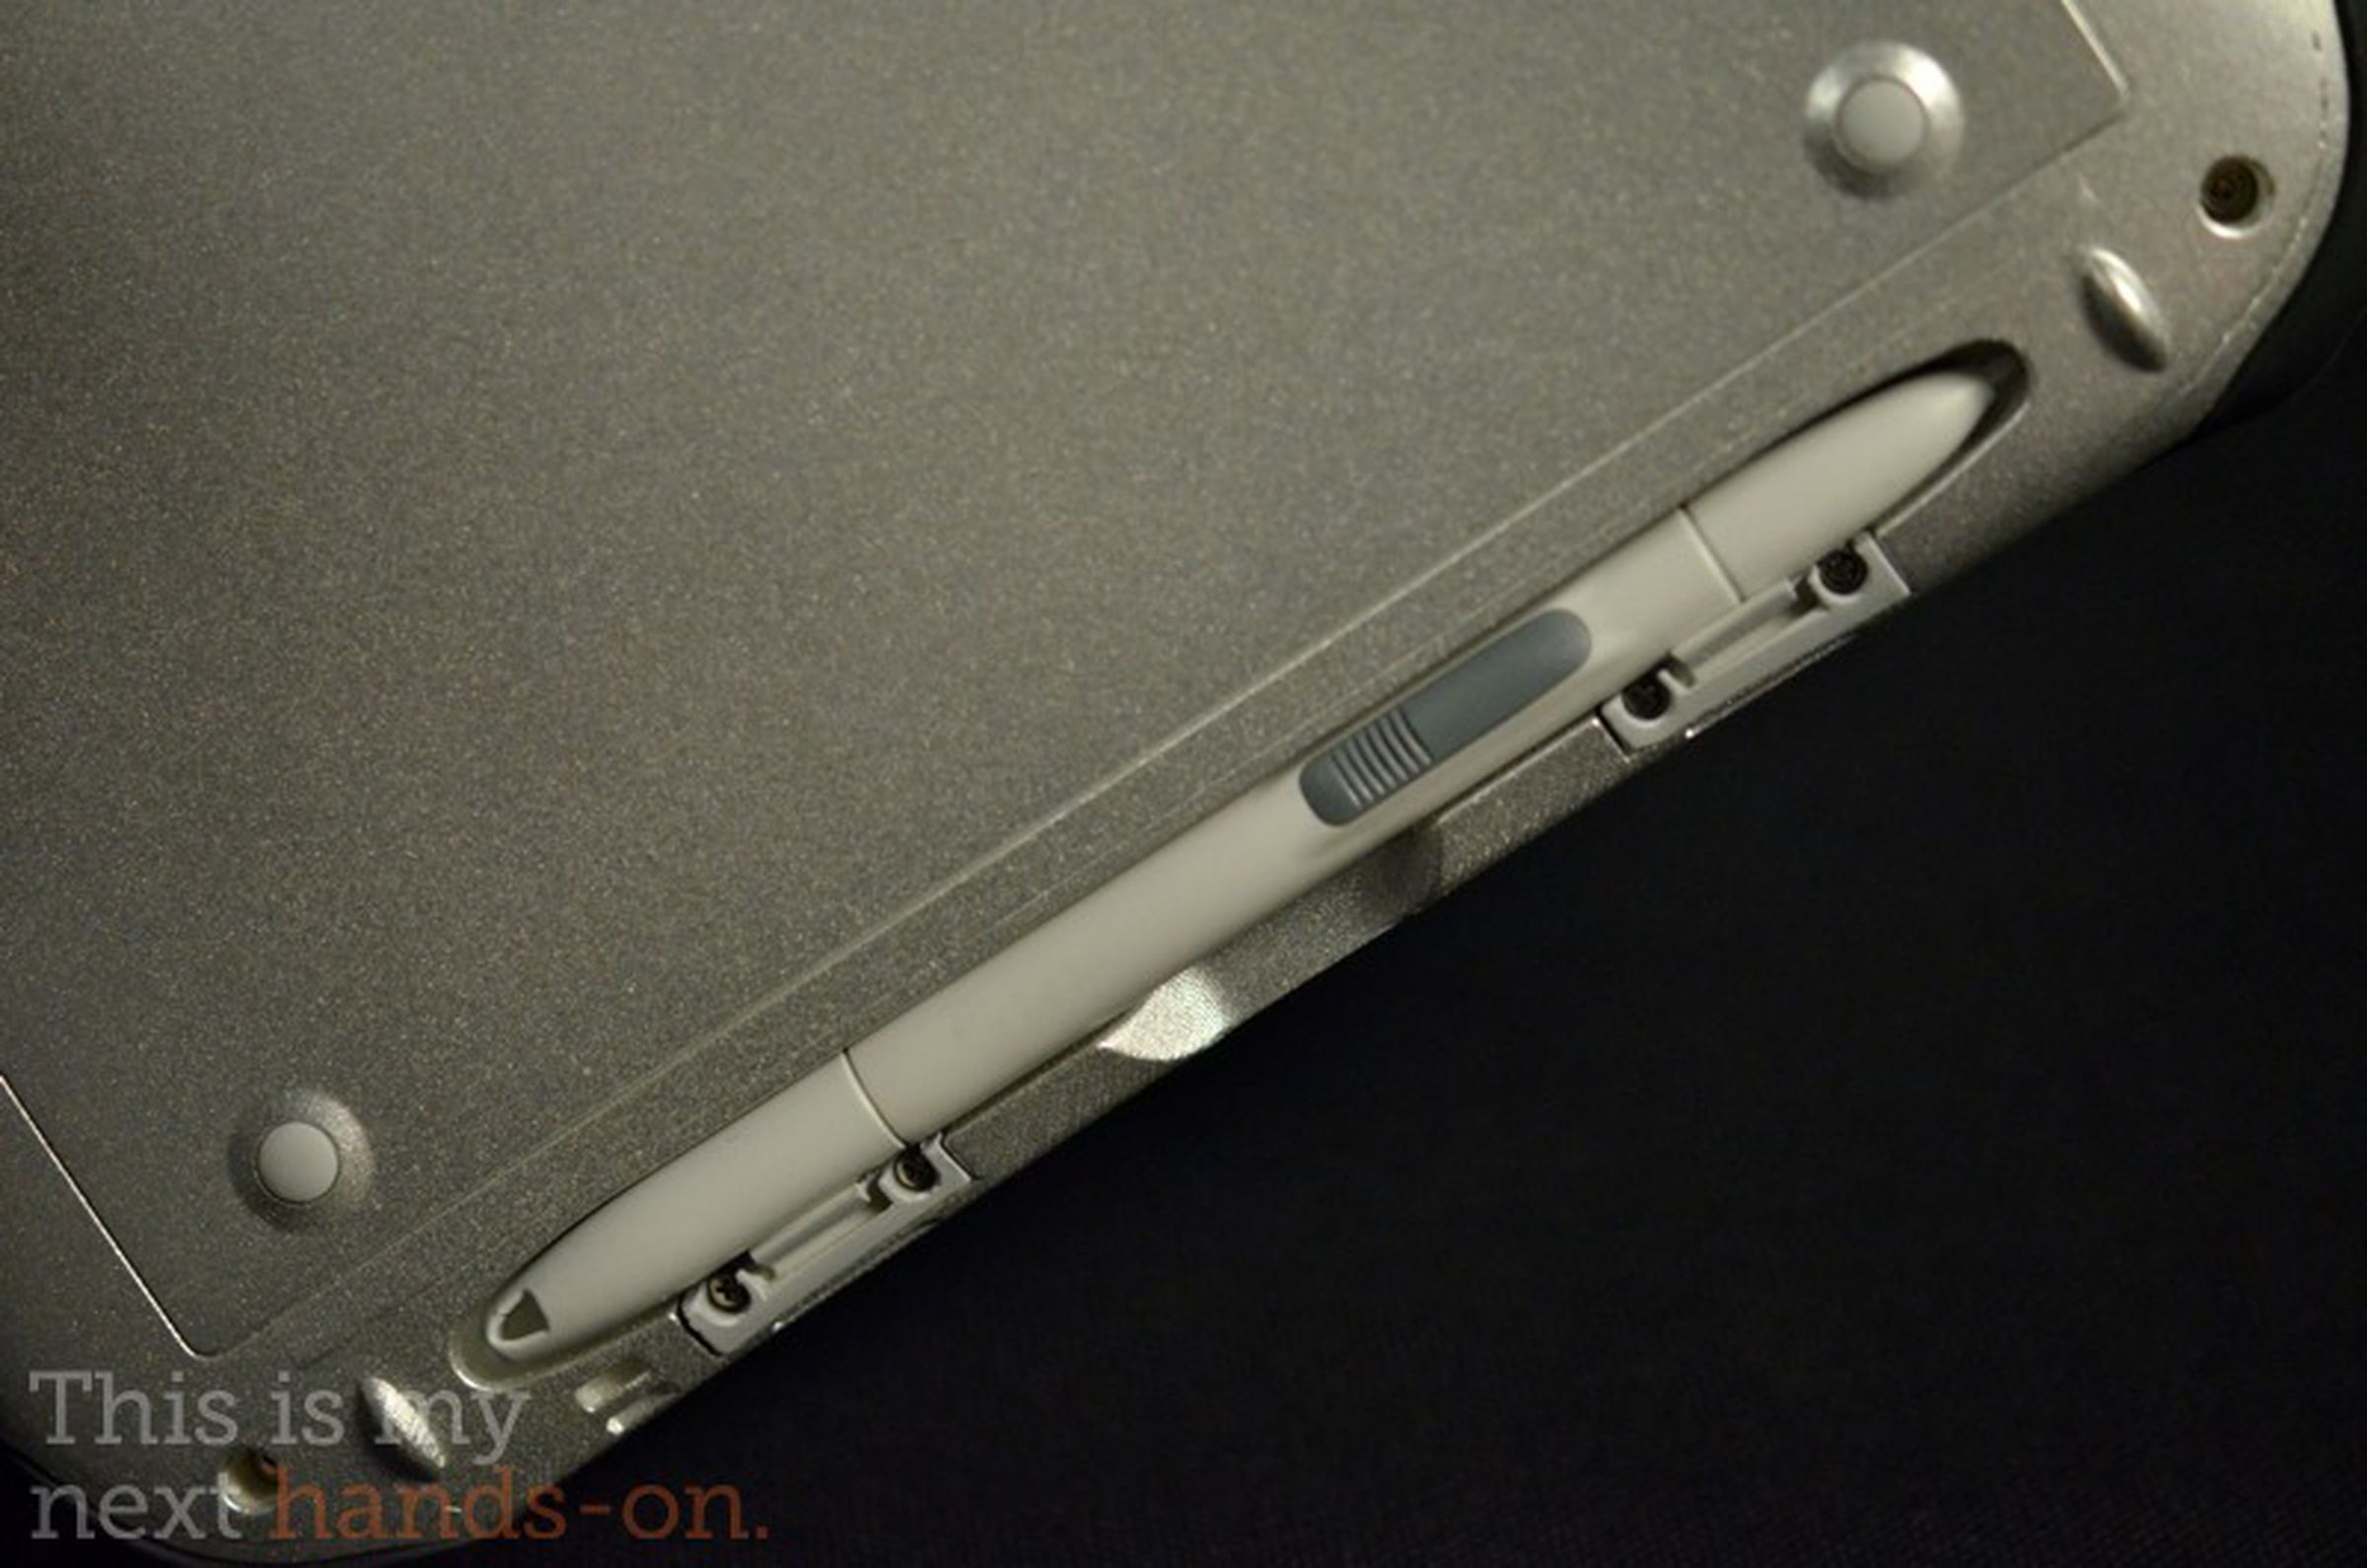 Panasonic Android Toughbook tablet hands-on pictures